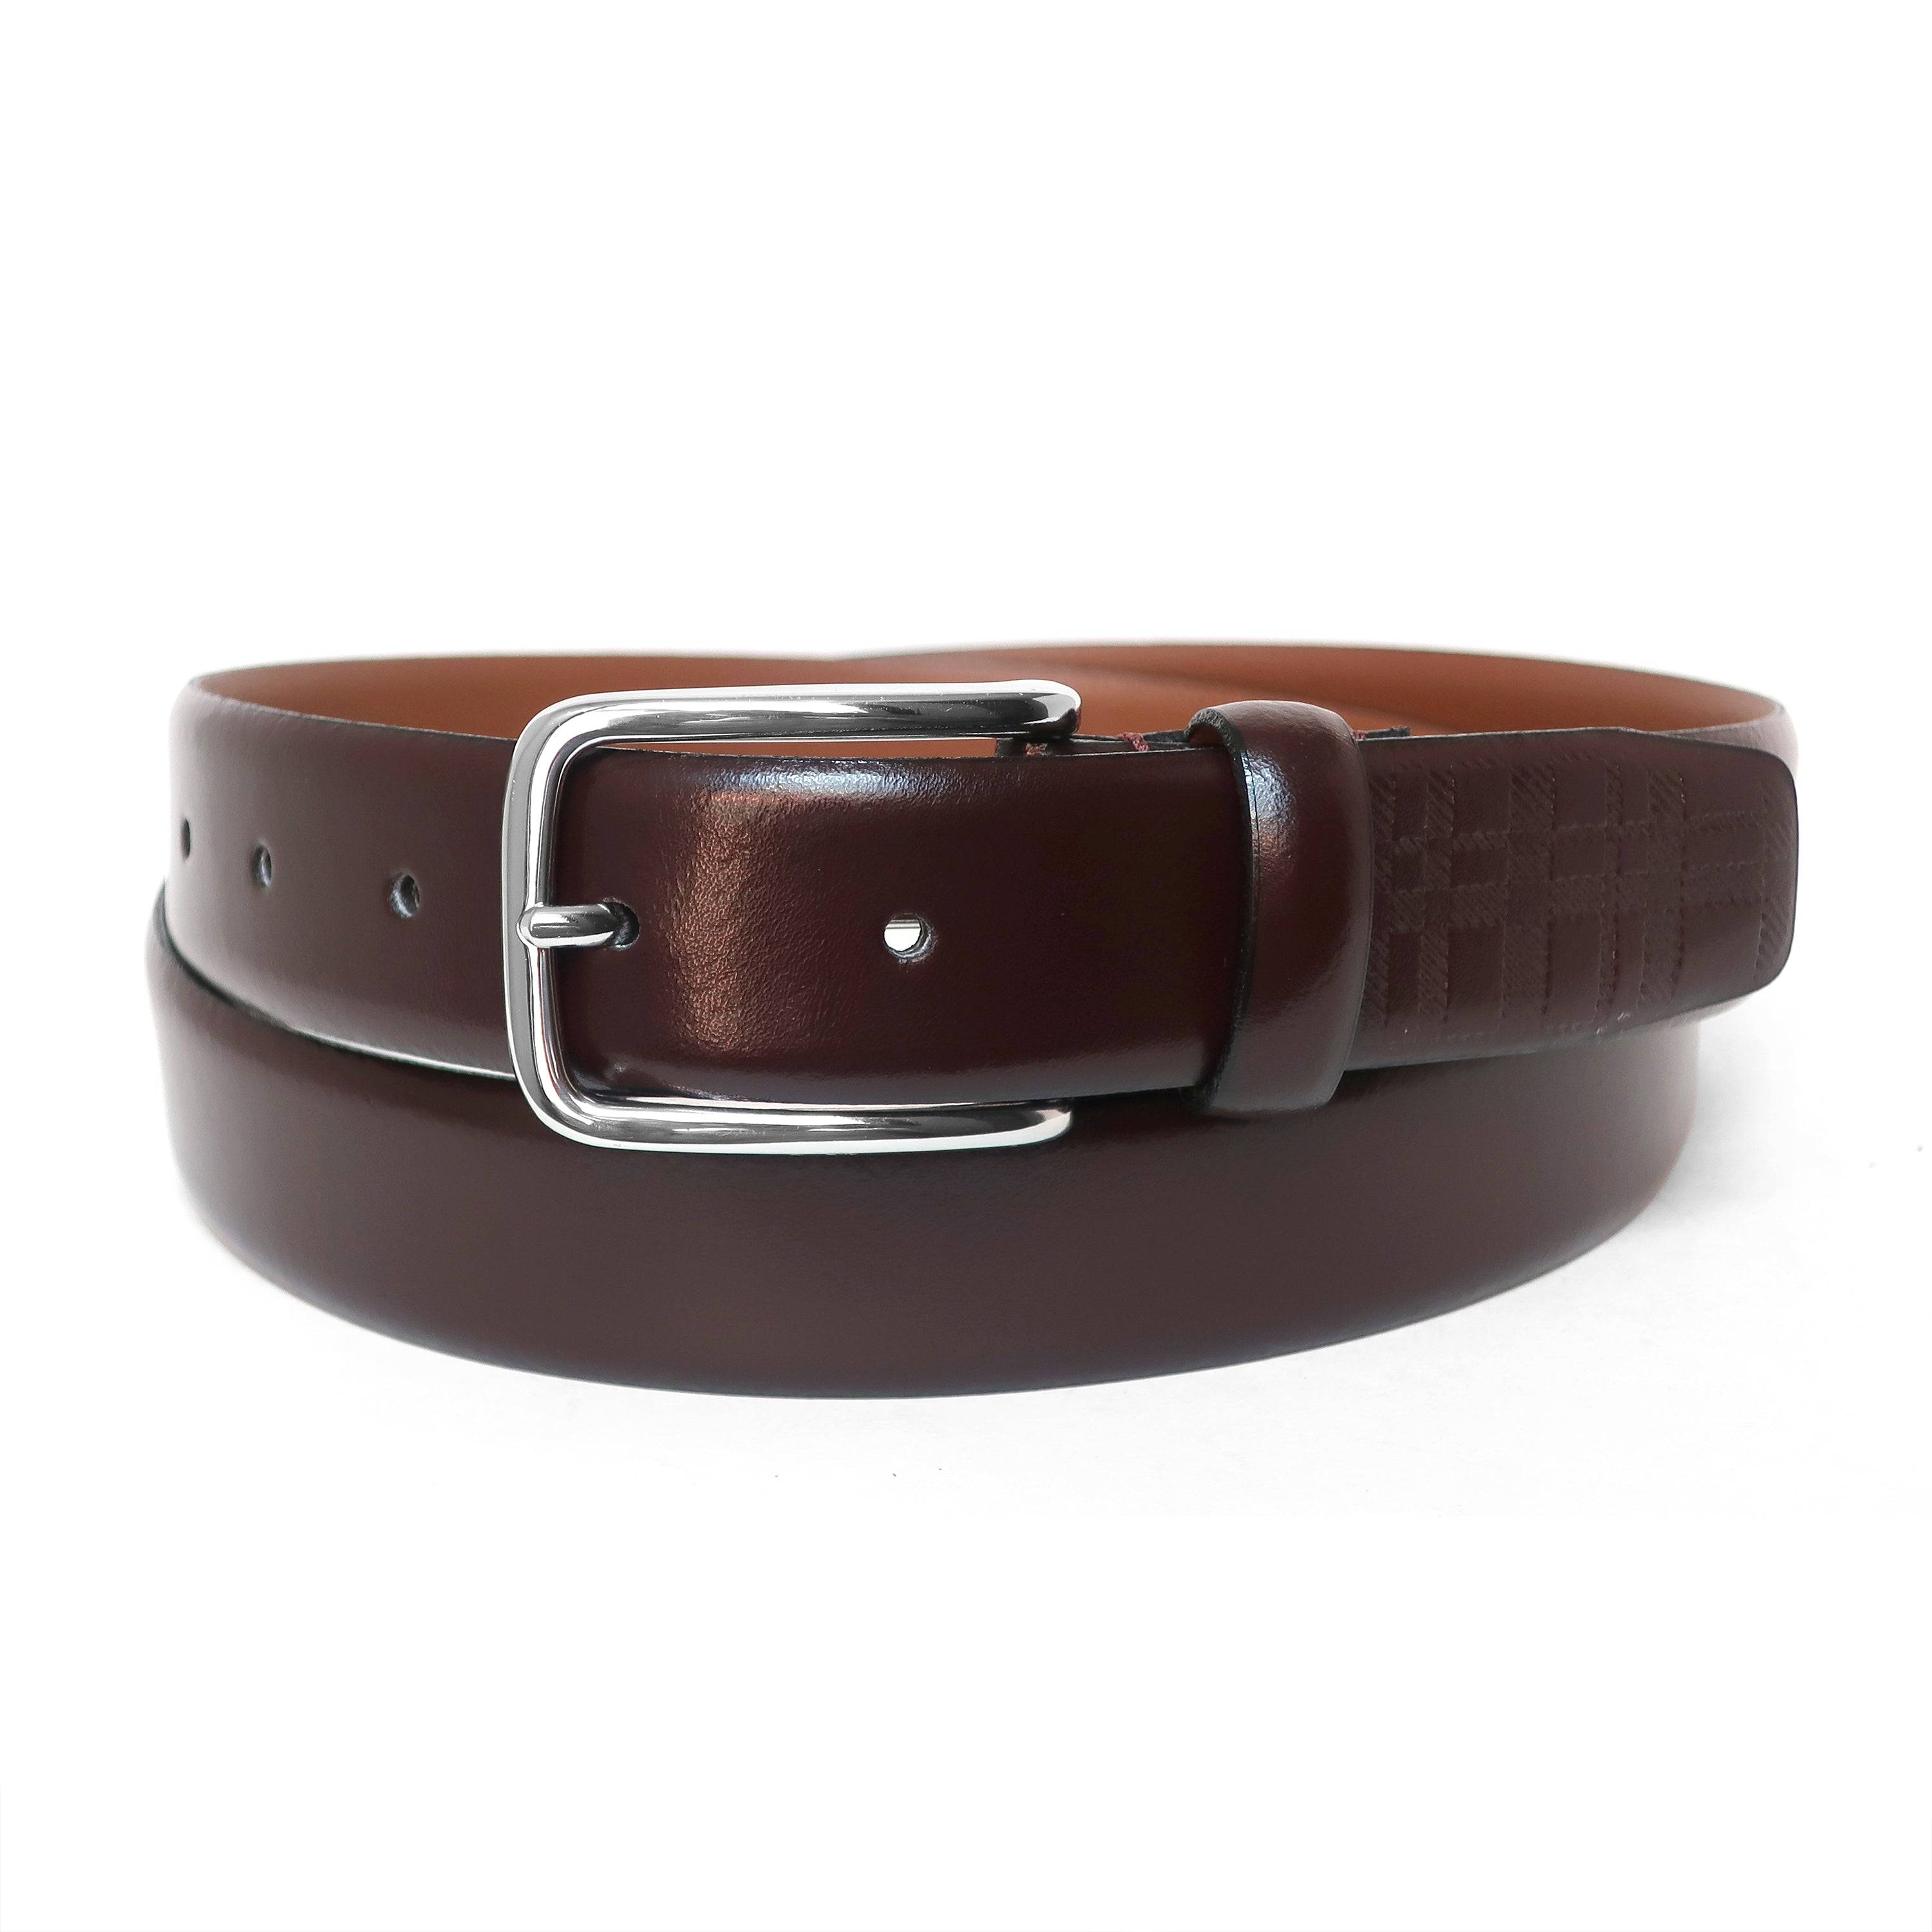 Anderson Full Grain Leather Belt Brown Made in USA